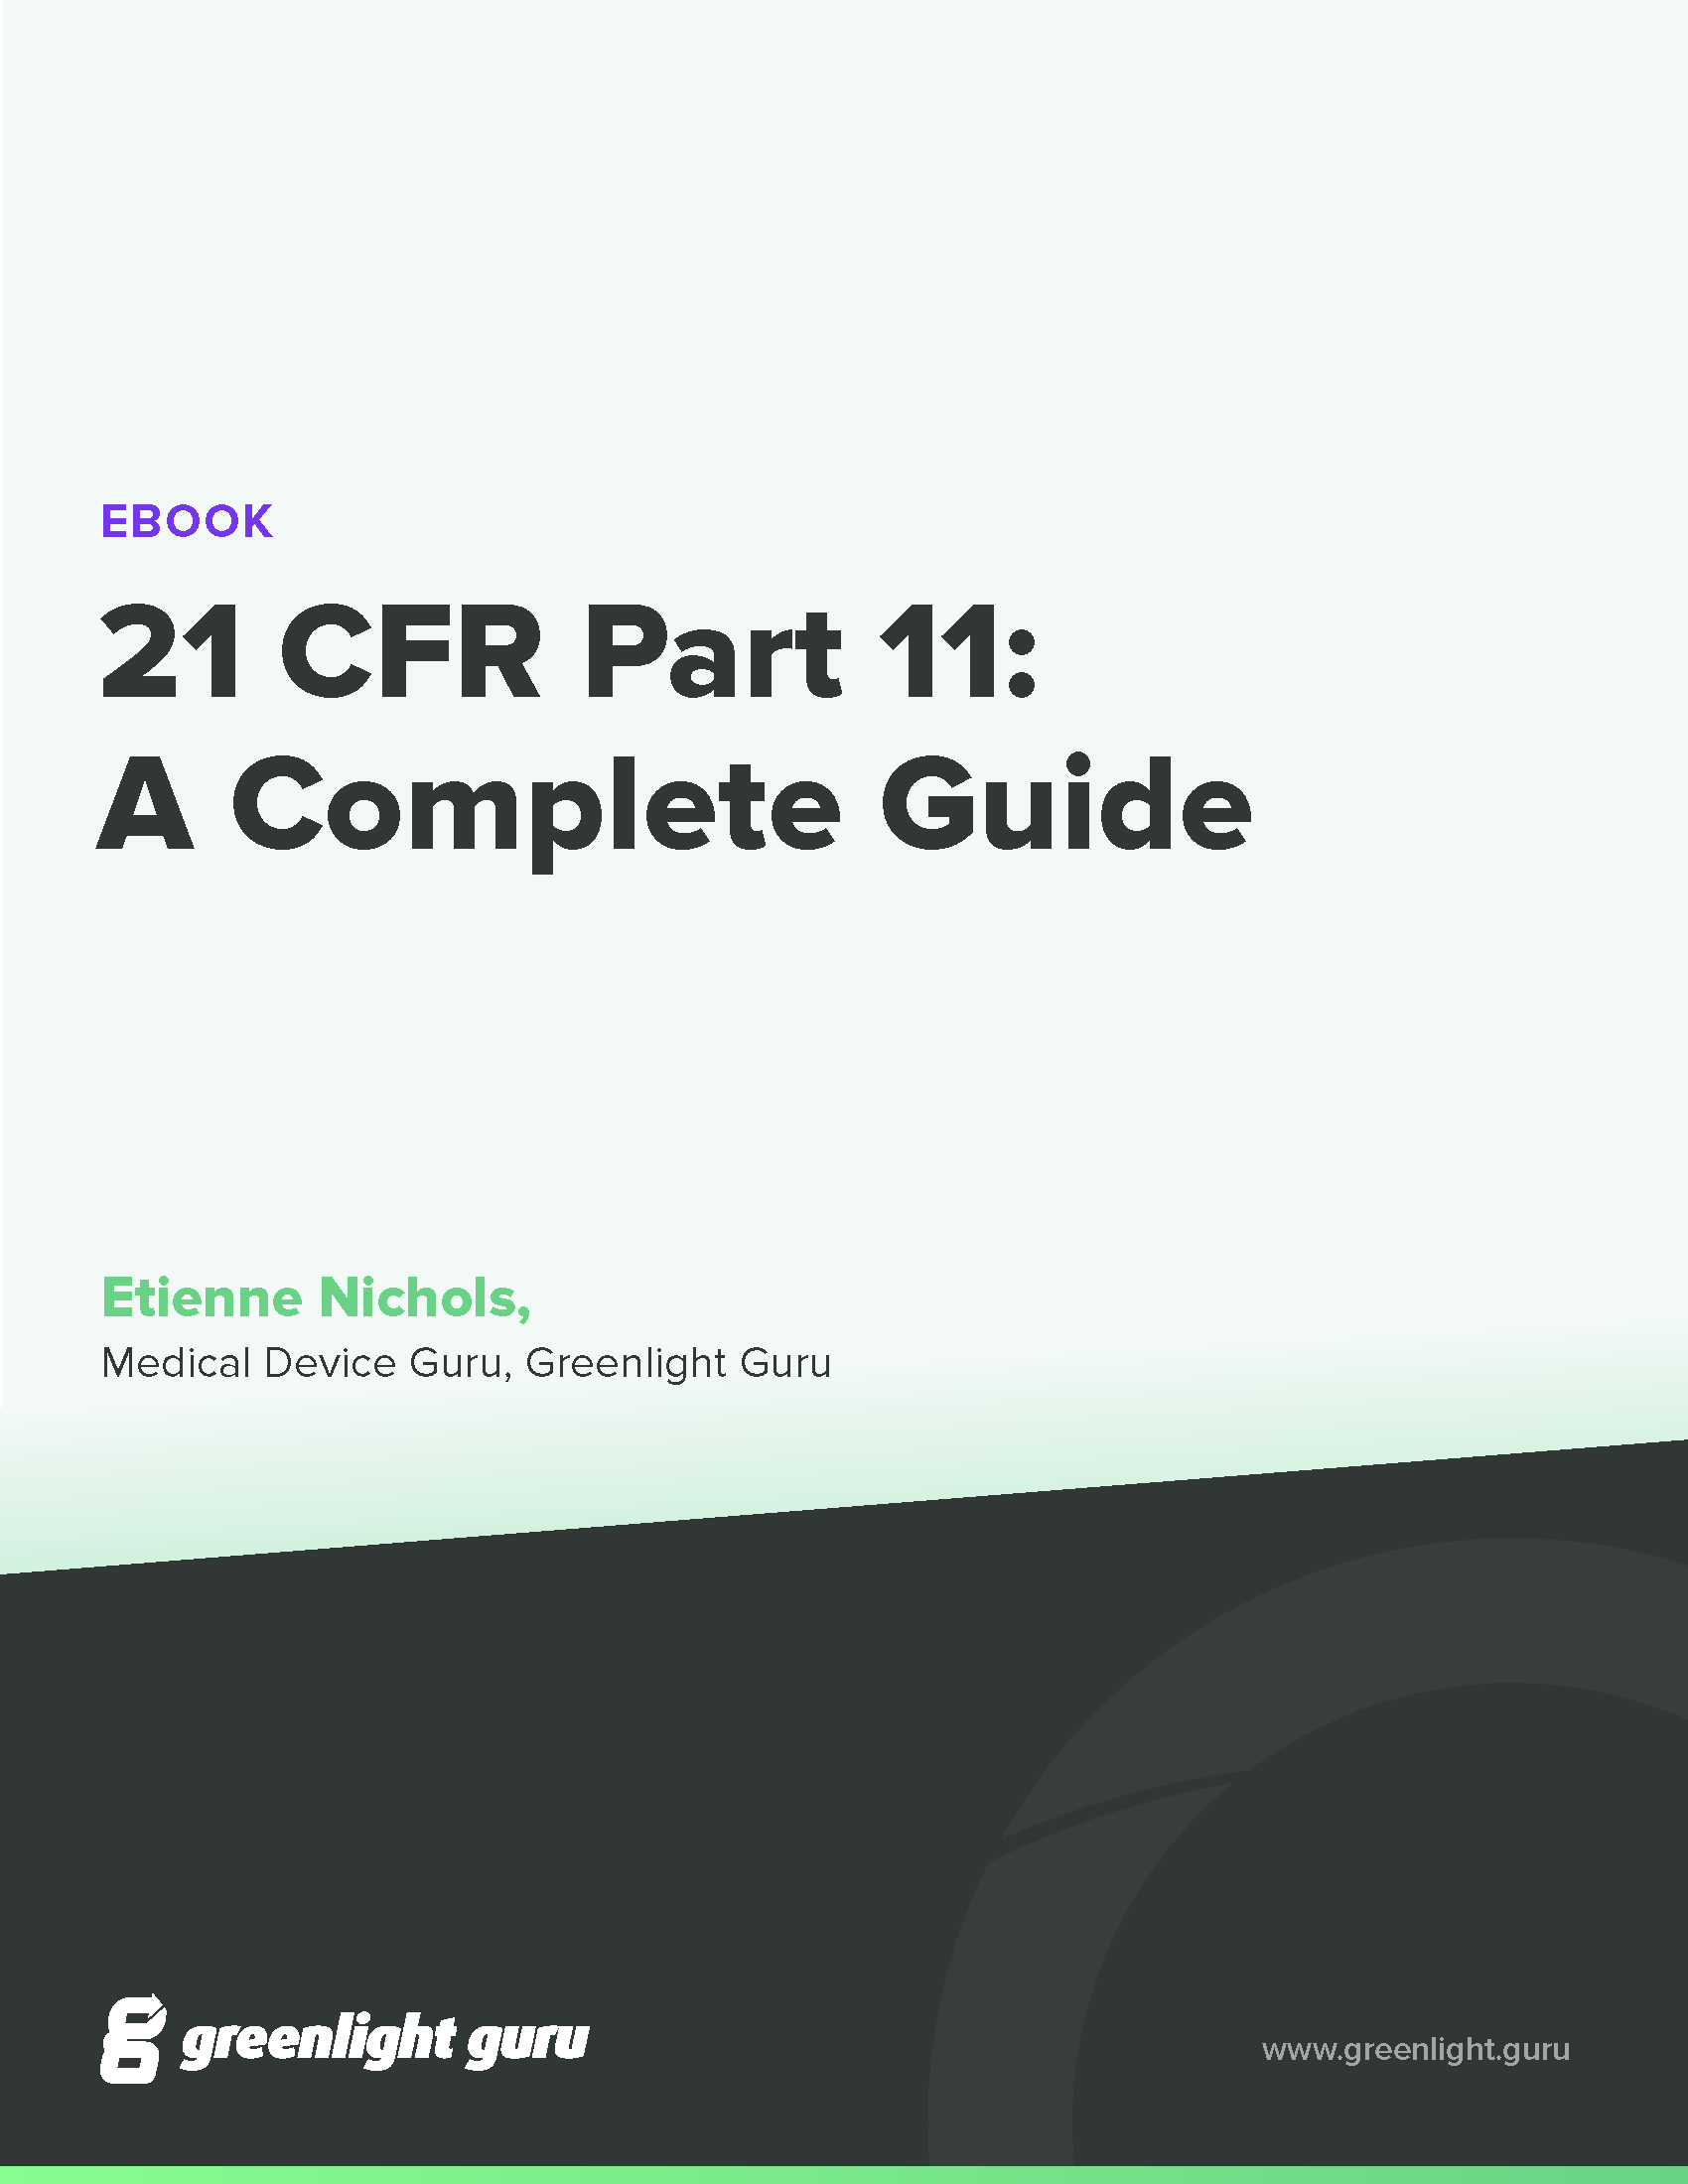 (cover) Complete Guide to 21 CFR Part 11